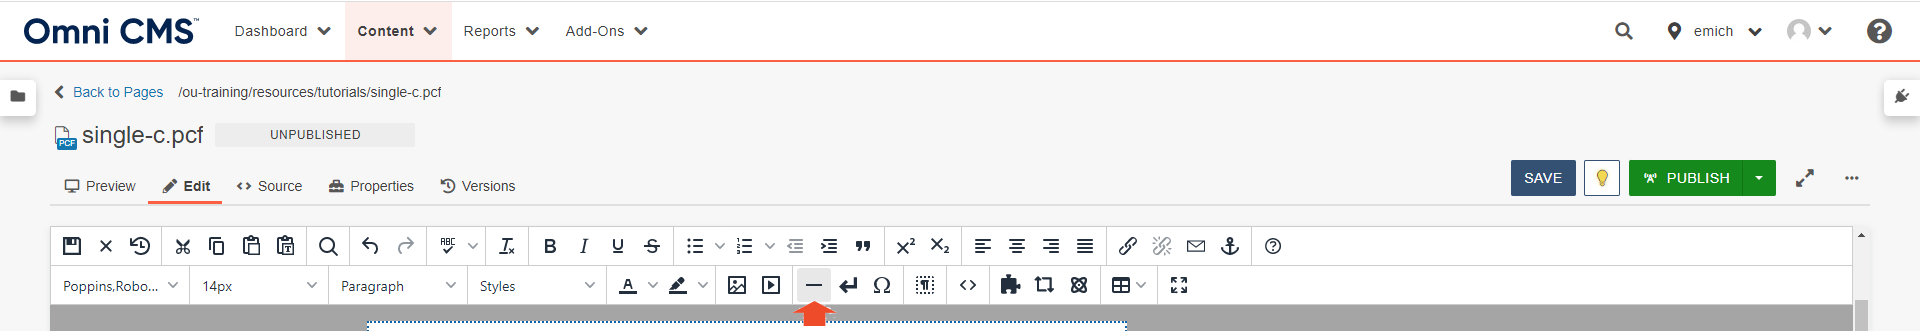 A screenshot of the horizontal line button in the Omni CMS edit toolbar.